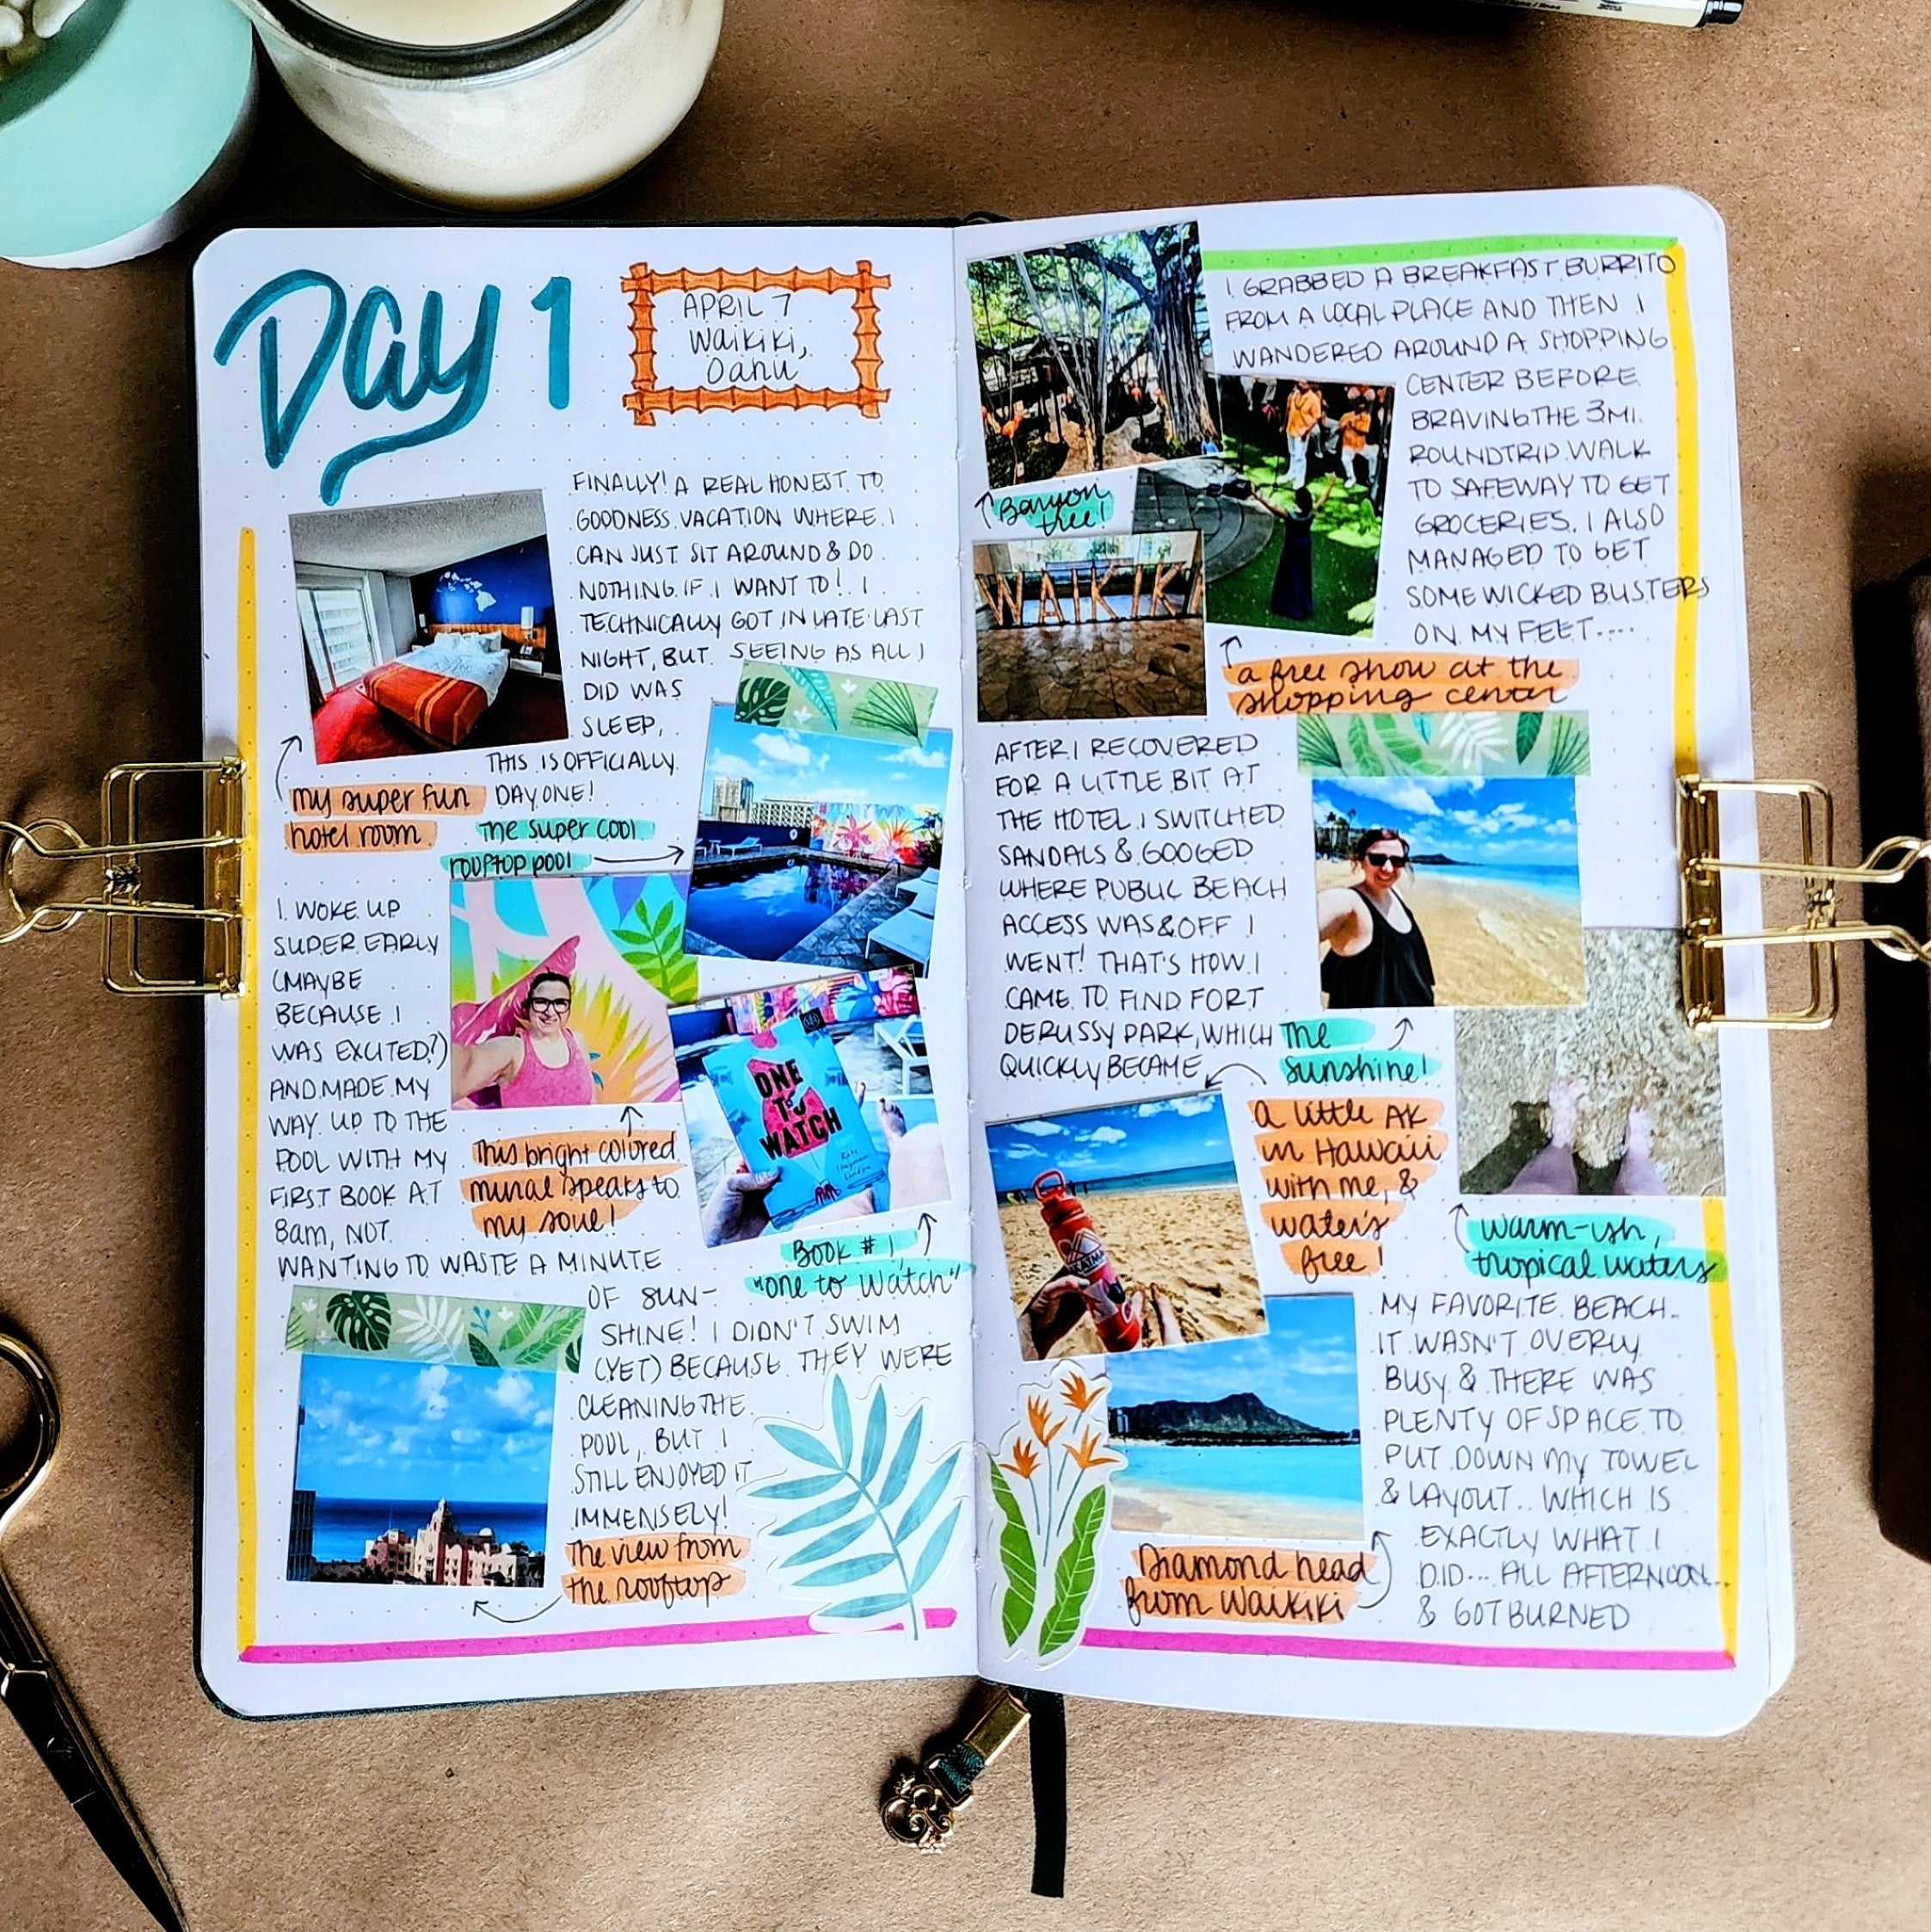 Free Printable Travel Journal To Document Your Adventures!